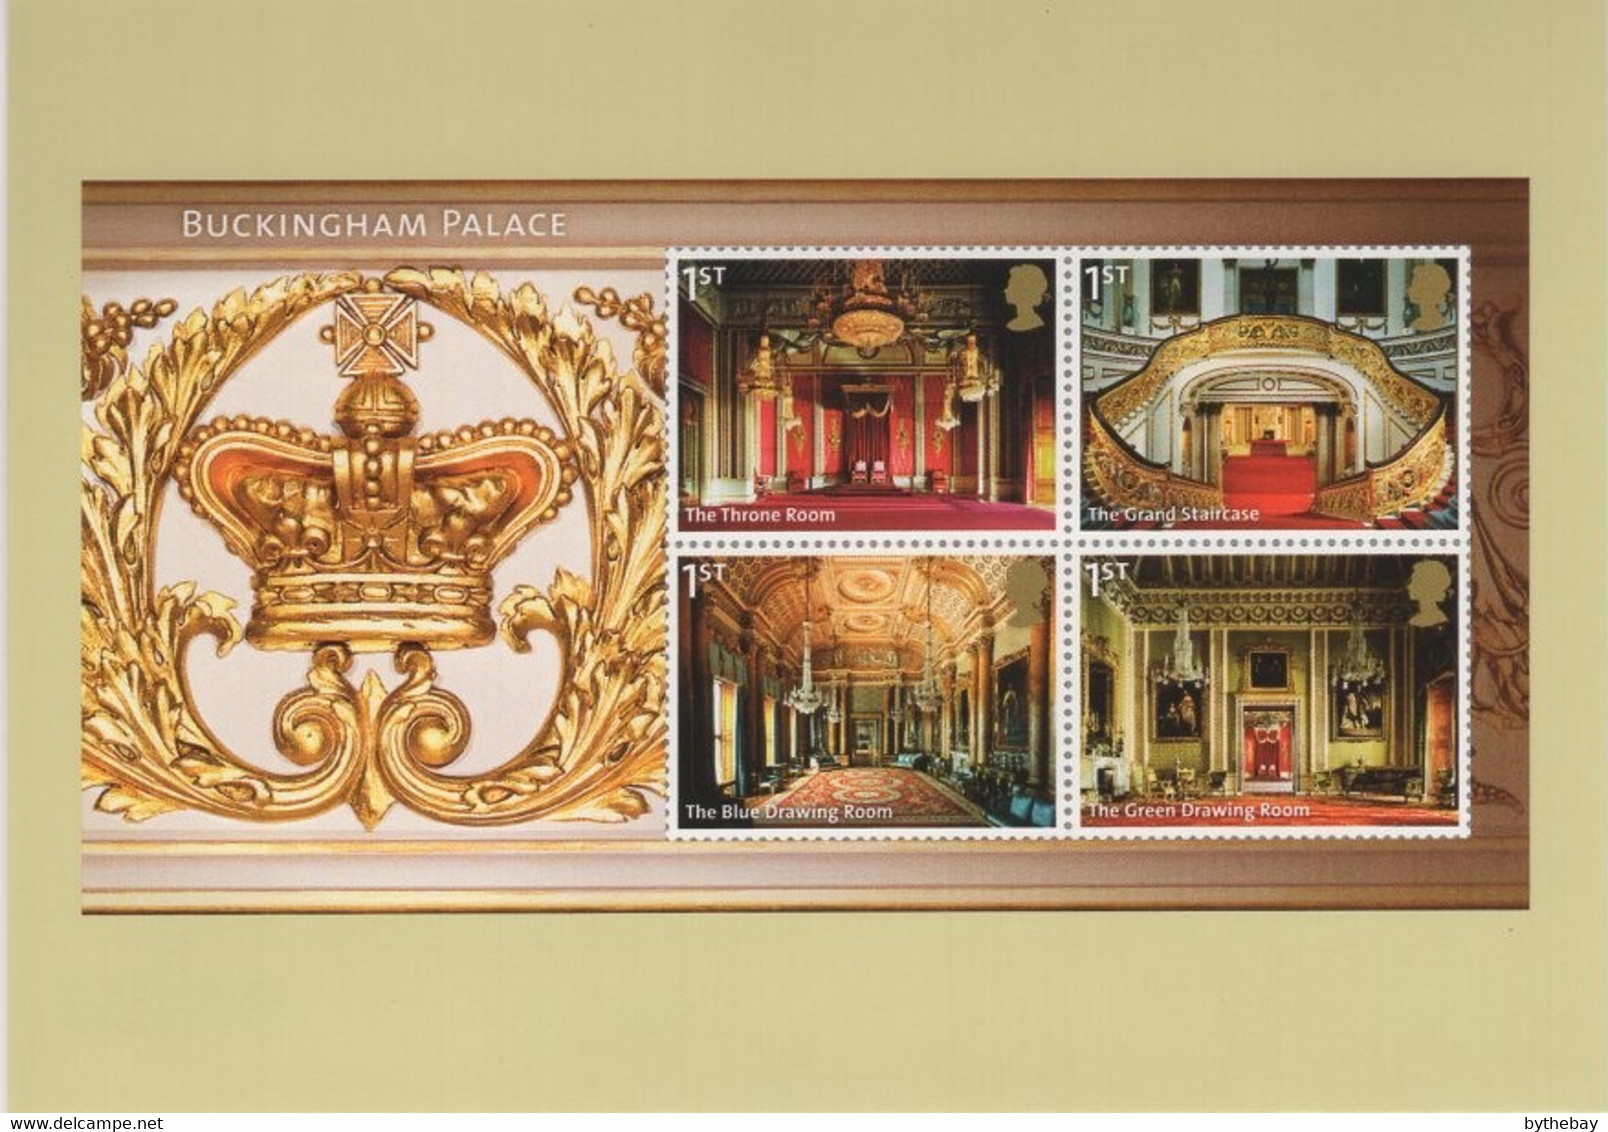 Great Britain 2014 PHQ Card Sc 3285 1st Rooms In Buckingham Palace - PHQ Karten